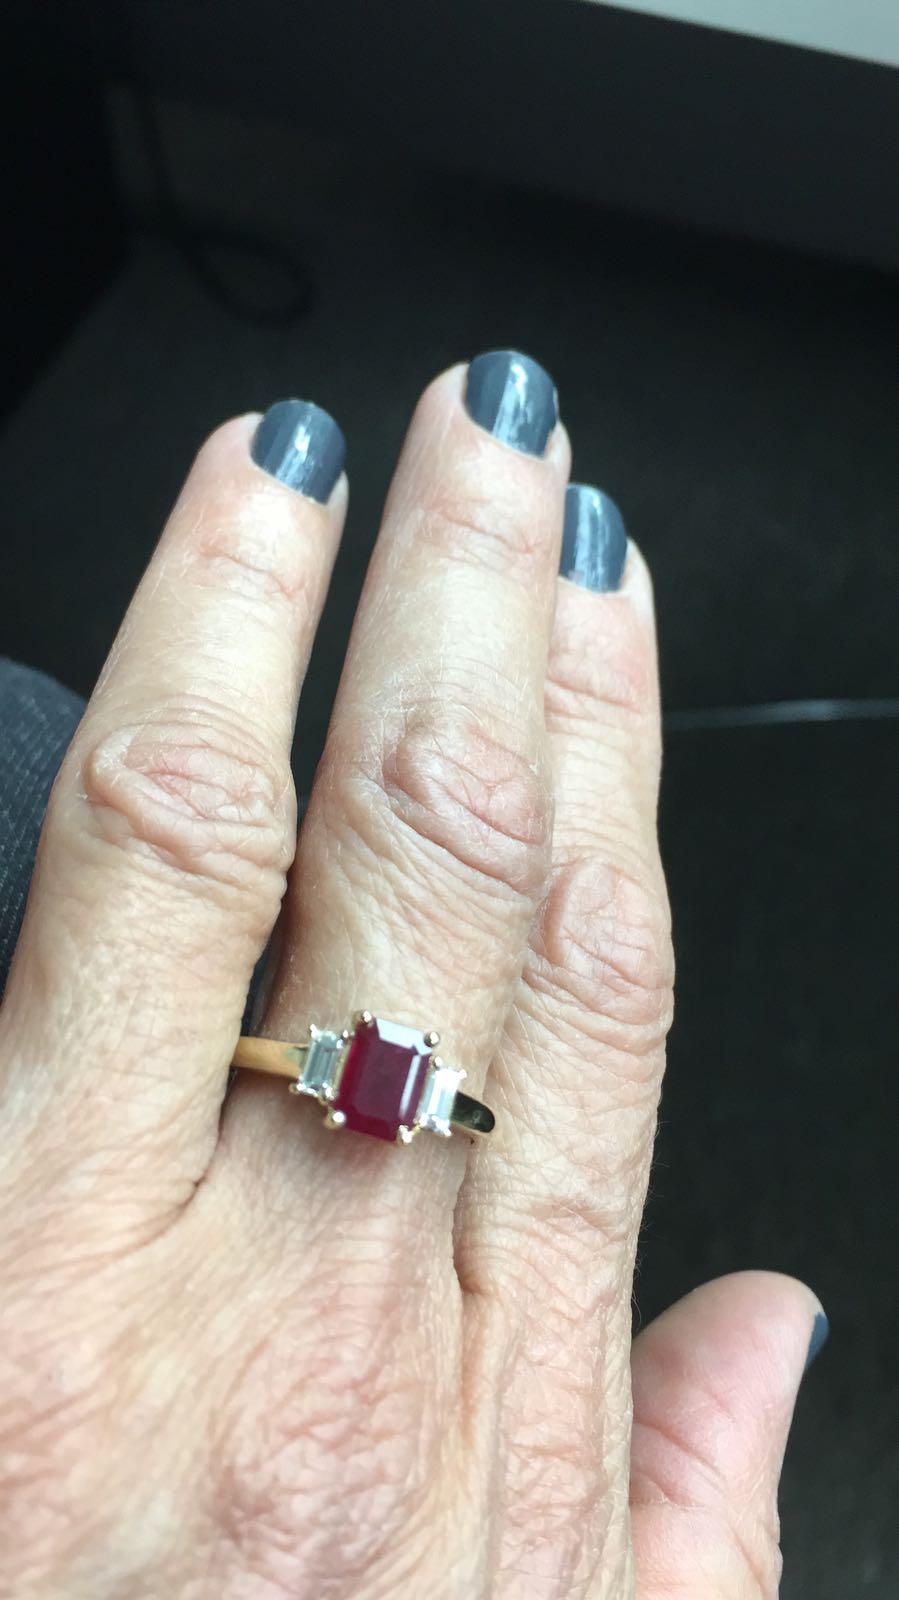  The emerald cut / cushion ruby in this ring has a total carat weight of 0.98 carats. The diamonds have a total carat weight of 0.30 carats.

All our Gemstones are genuine, and are sourced with the highest degree of integrity.
